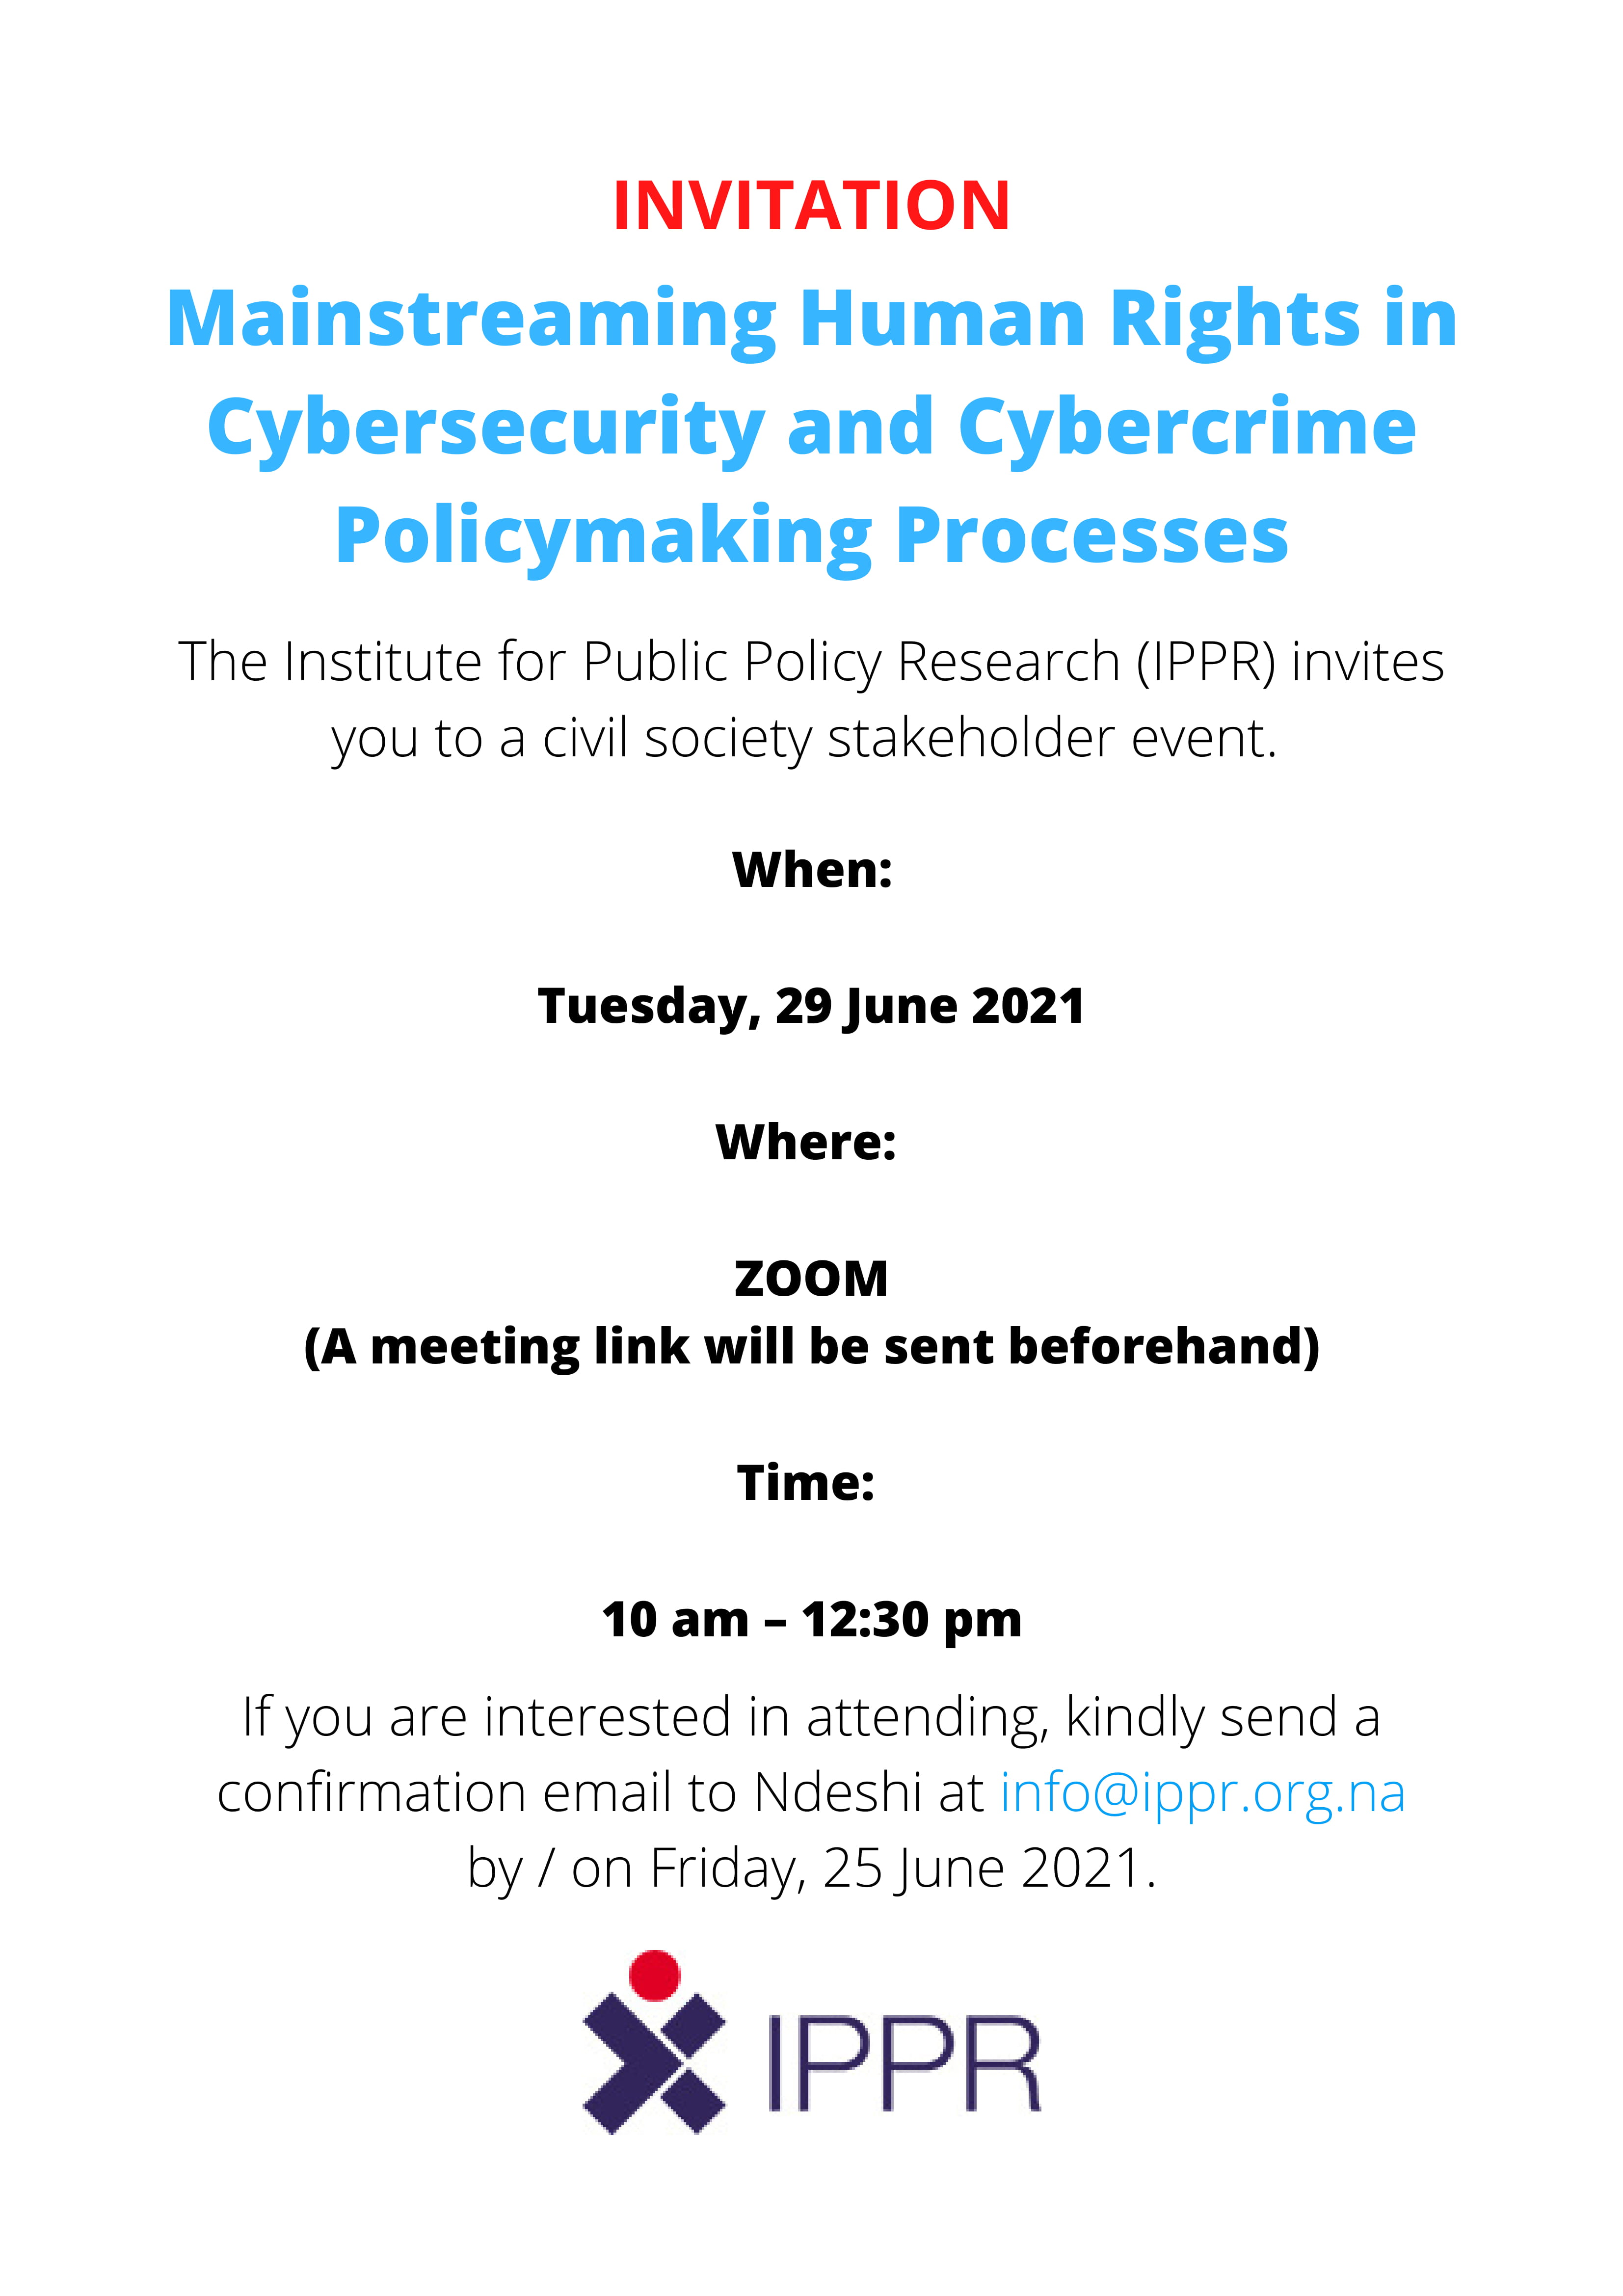 INVITATIONMainstreaming Human Rights in Cybersecurity and Cybercrime Policymaking Processes 1